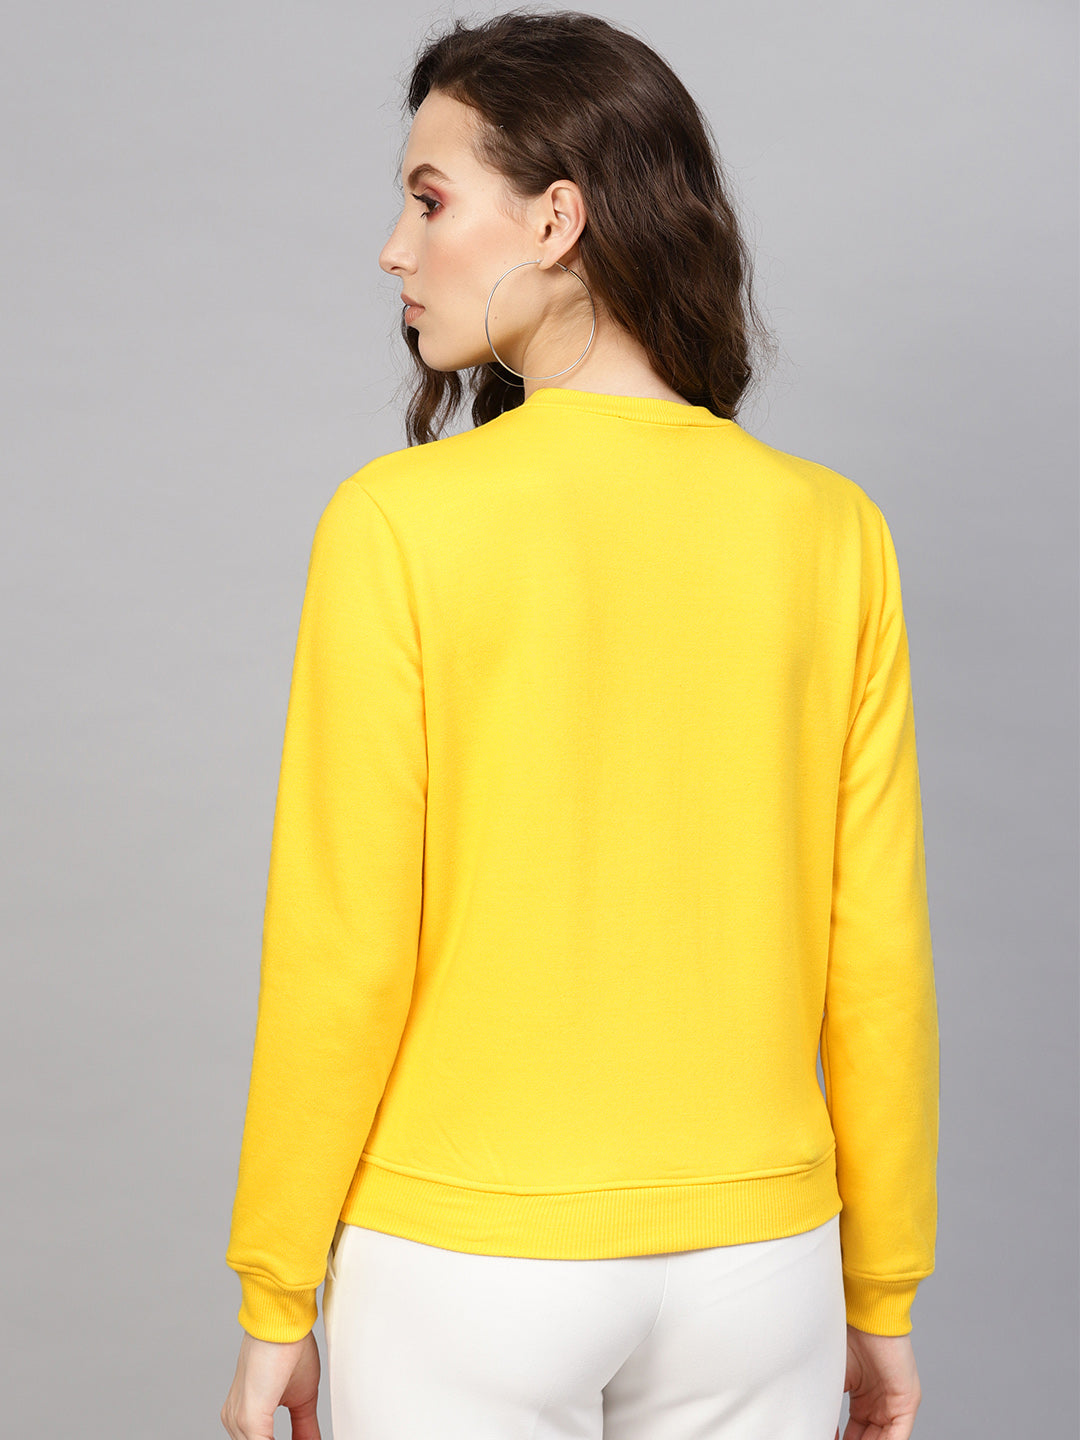 Yellow Floral Patch Sweatshirt